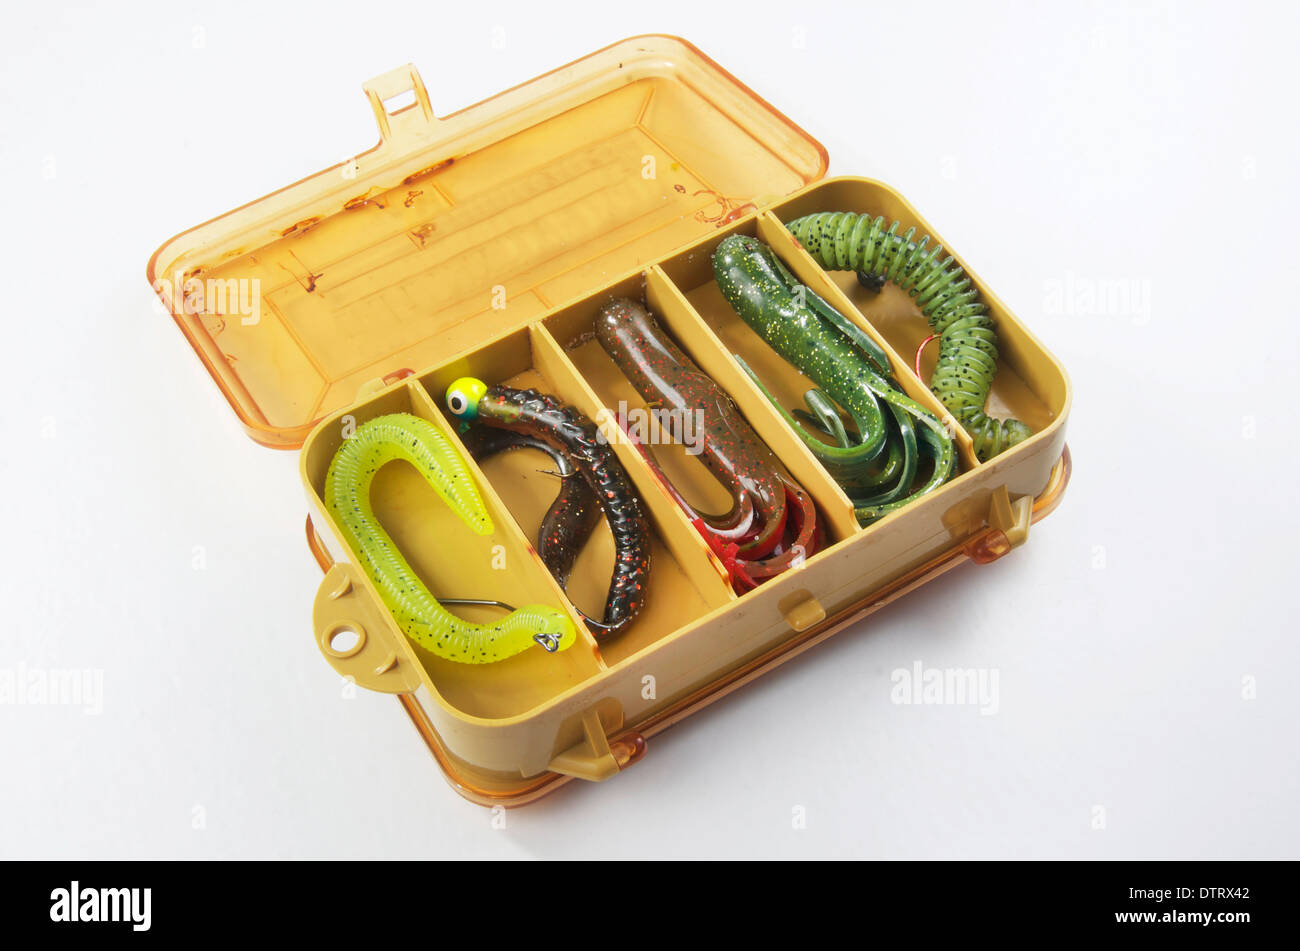 Bass bait, or old fishing tackle box with rubber worms and tubes. Stock Photo